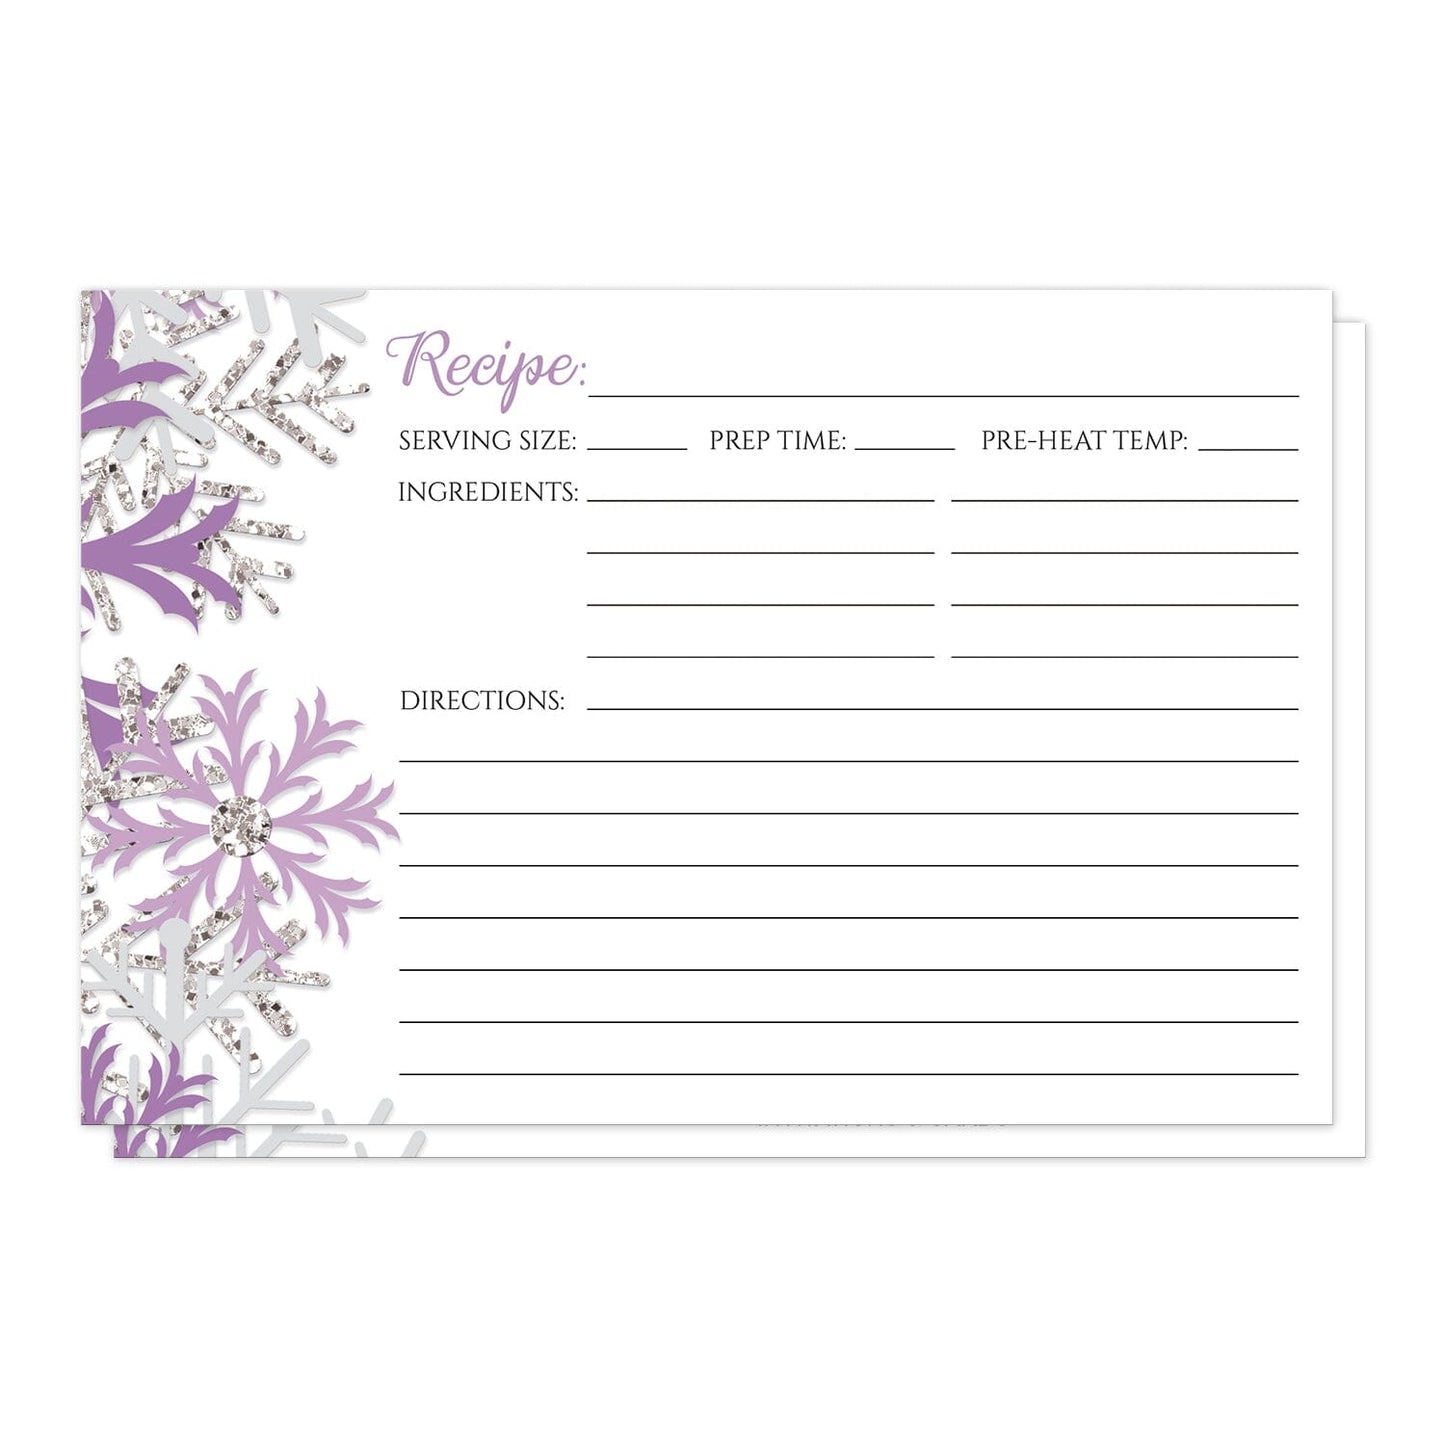 Winter Purple Silver Snowflake Recipe Cards at Artistically Invited. Winter purple silver snowflake recipe cards designed with purple, light purple, and silver-colored glitter-illustrated snowflakes along the left side. The recipe is to be handwritten over white on the remaining area of the recipe cards beside the snowflakes design.